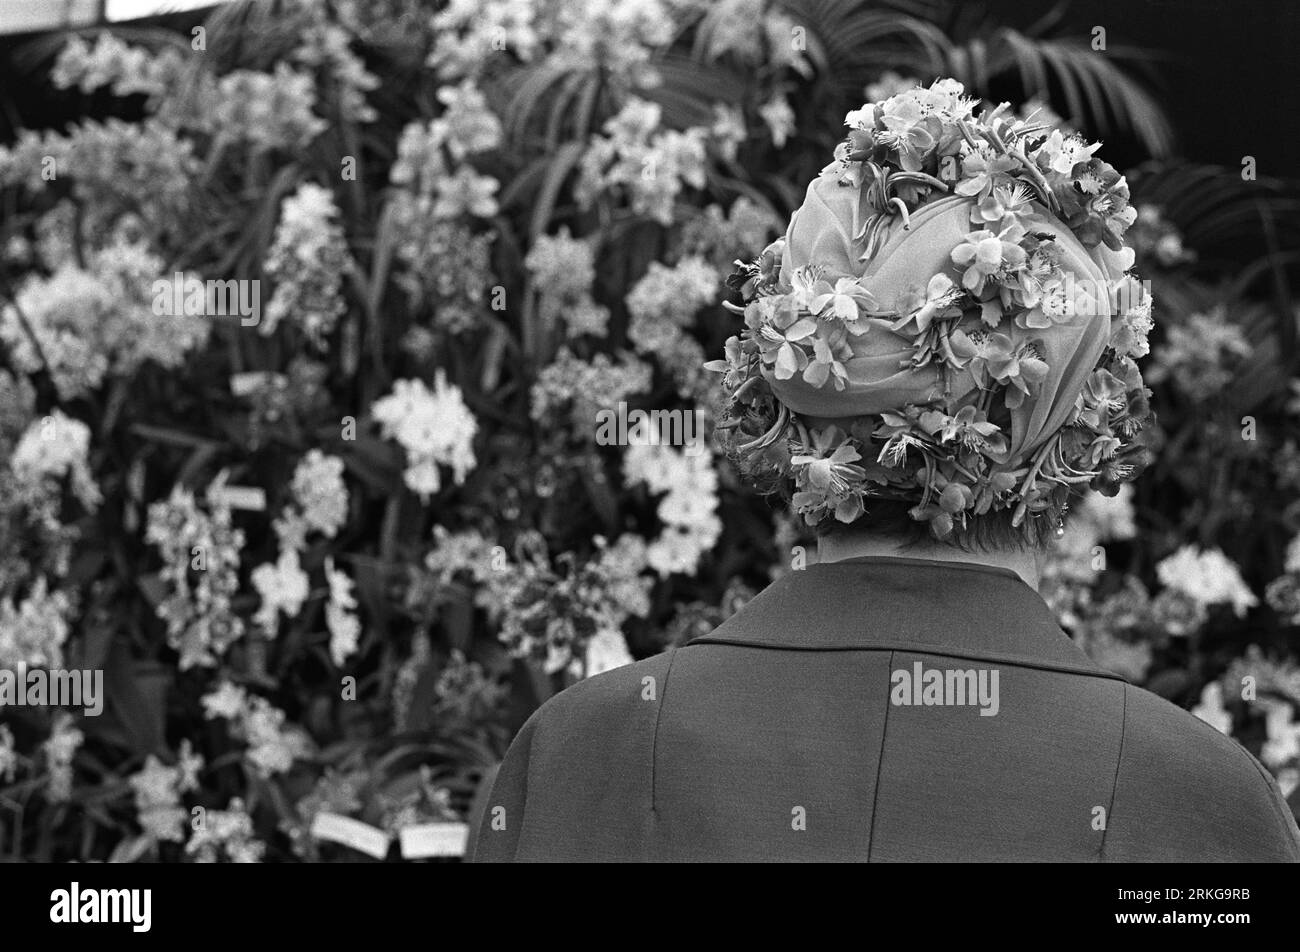 Chelsea Flower Show 1960s UK. A older woman, an anthophile in a floral hat admires a stand of Narcissi at the Chelsea, London, England circa May 1969. HOMER SYKES. Stock Photo